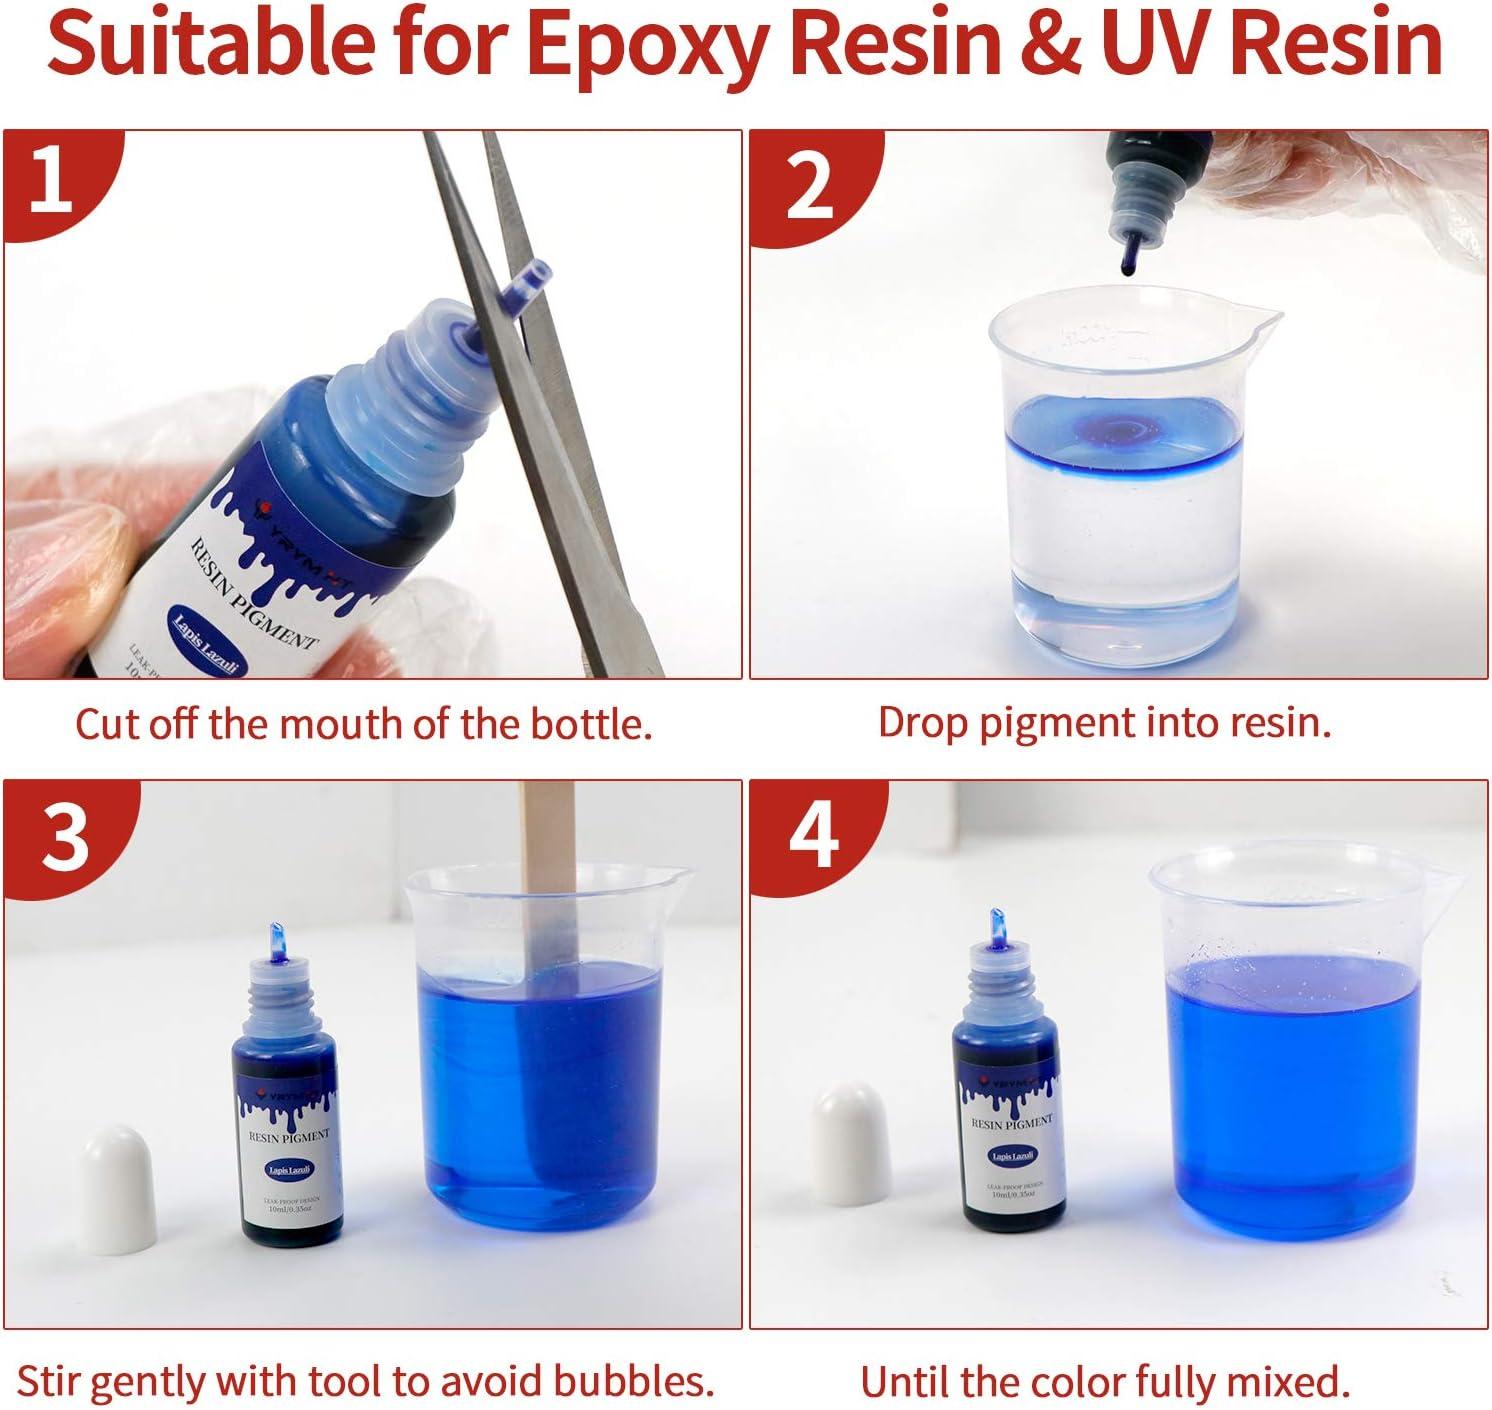 Epoxy Resin Pigment - 6 Colors Opaque UV Resin Dye, Epoxy Resin Color,  Highly Concentrated Epoxy Resin Colorant for Resin Jewelry Making Kit, DIY  Crafts